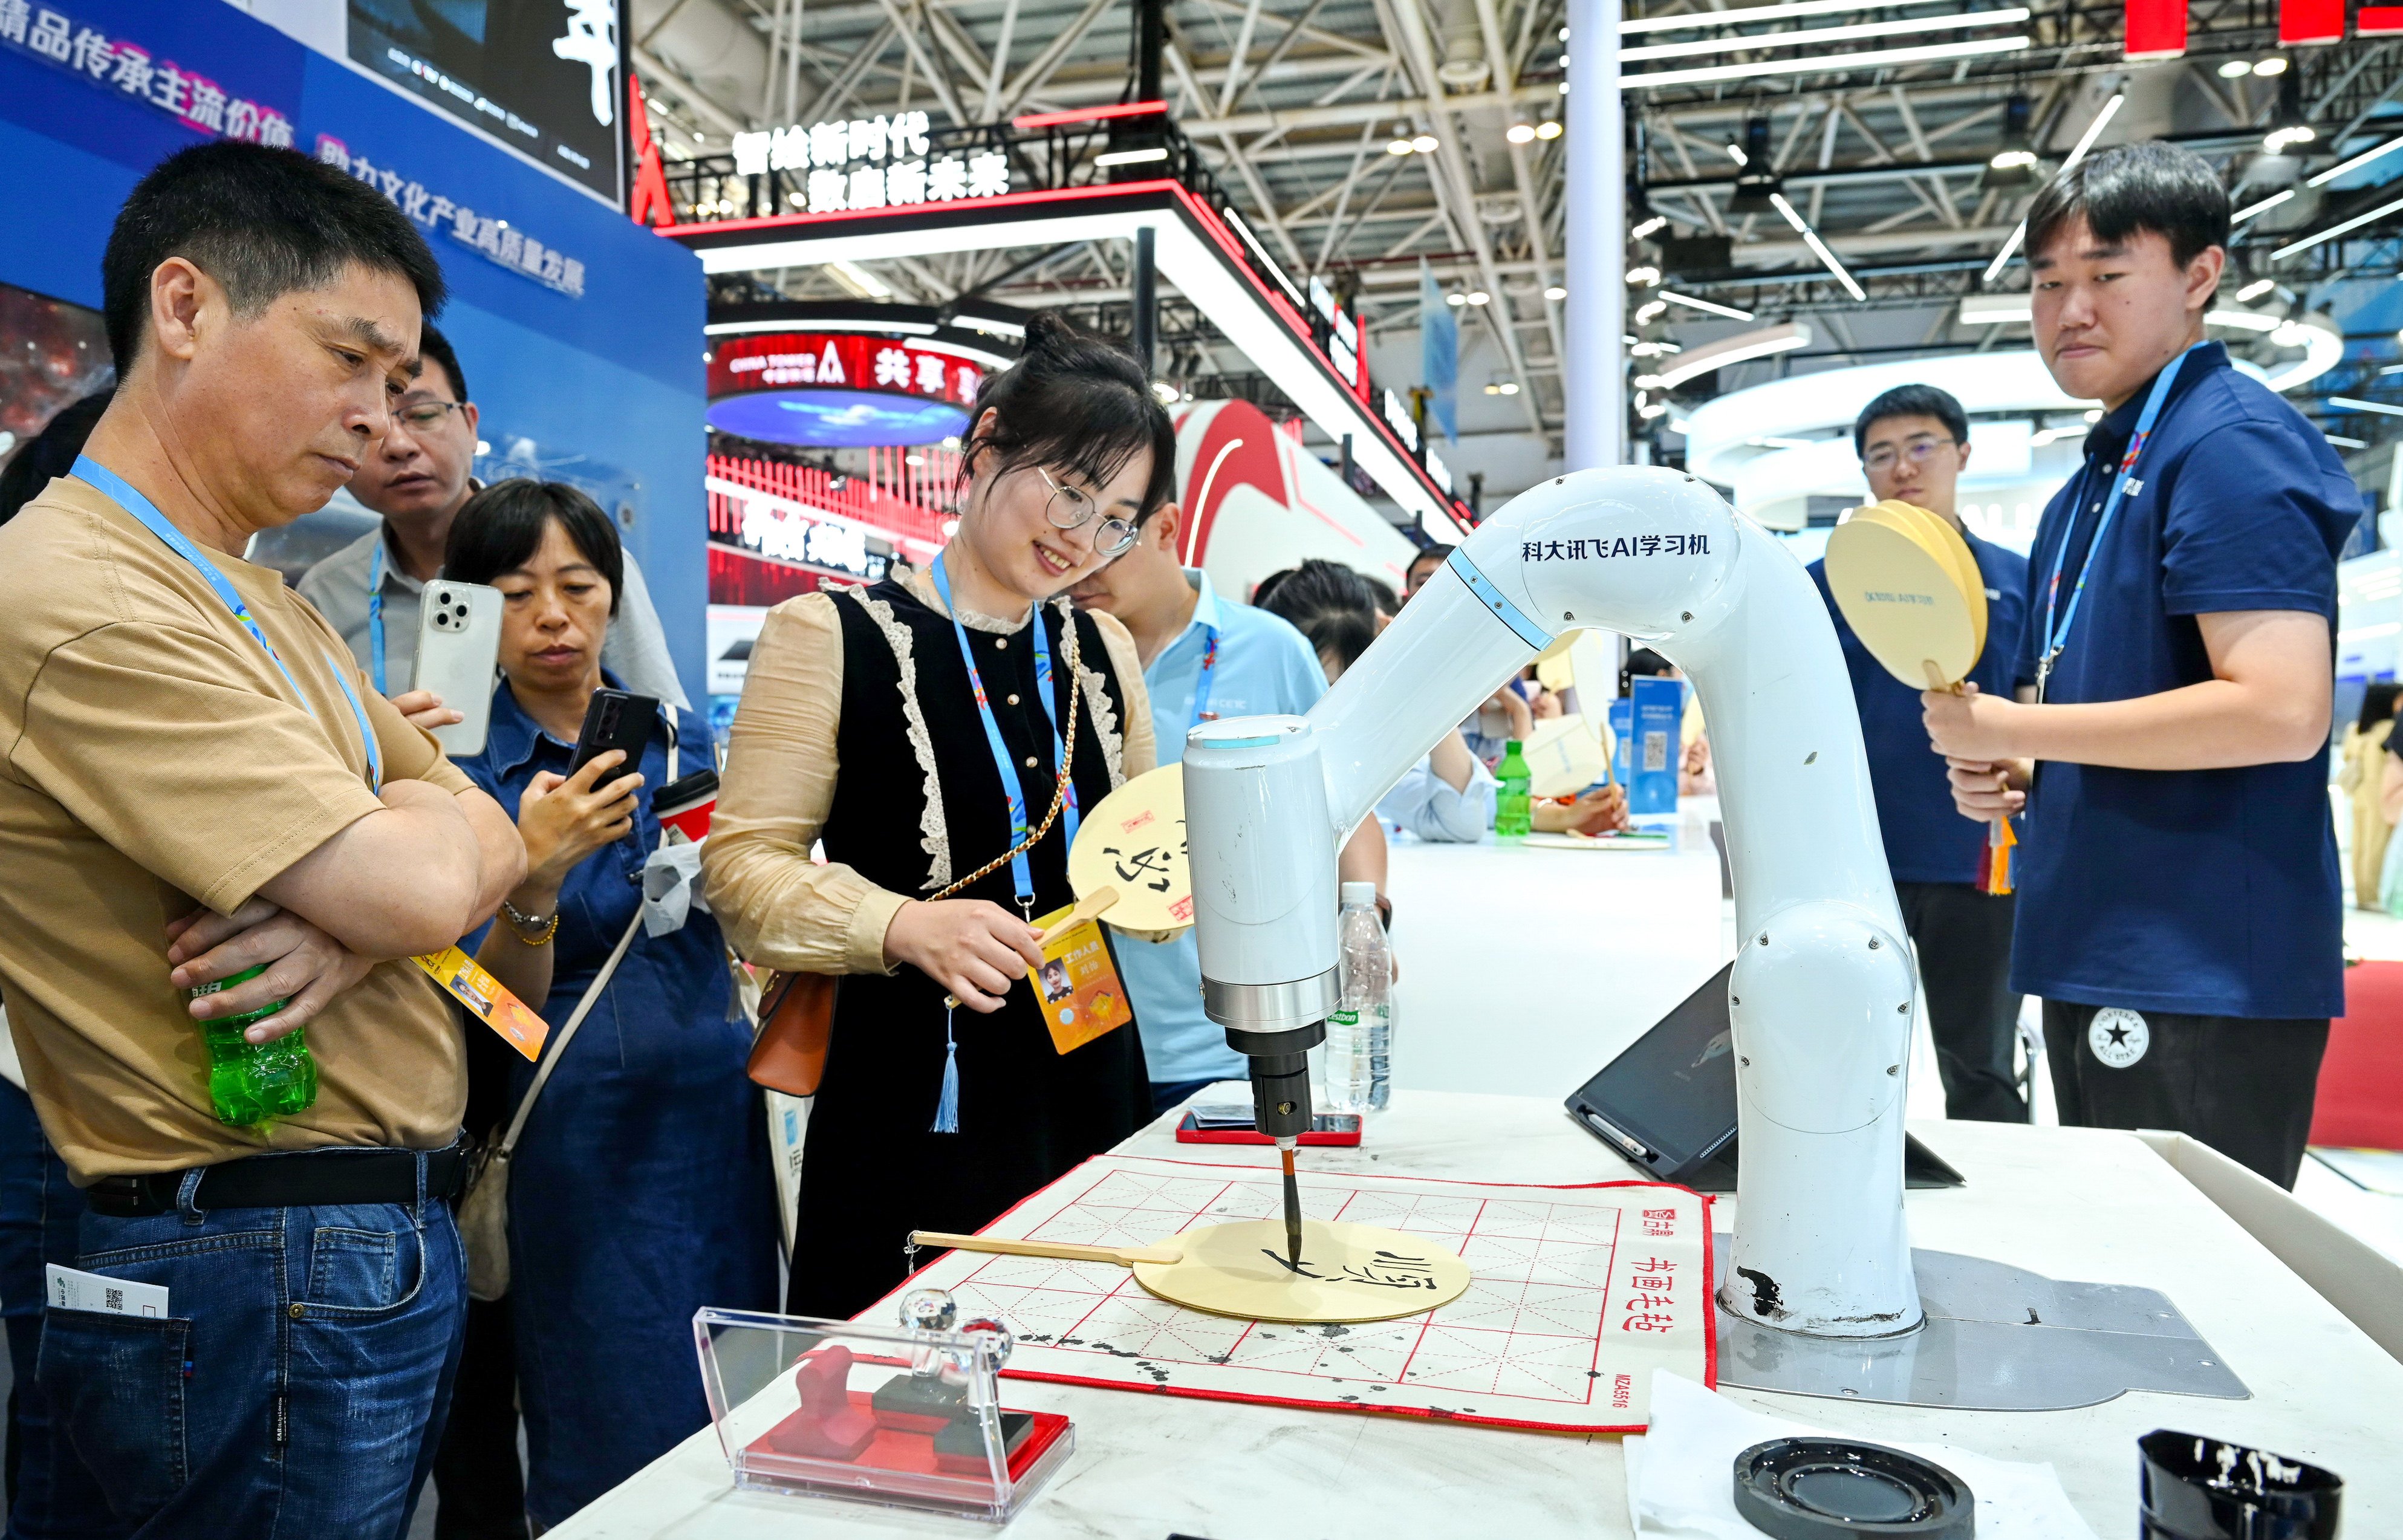 A calligraphy robot decorates a fan at the 7th Digital China Summit in the southeastern city of Fuzhou on May 24. China has been rapidly advancing its AI capabilities to compete against the US. Photo: Xinhua